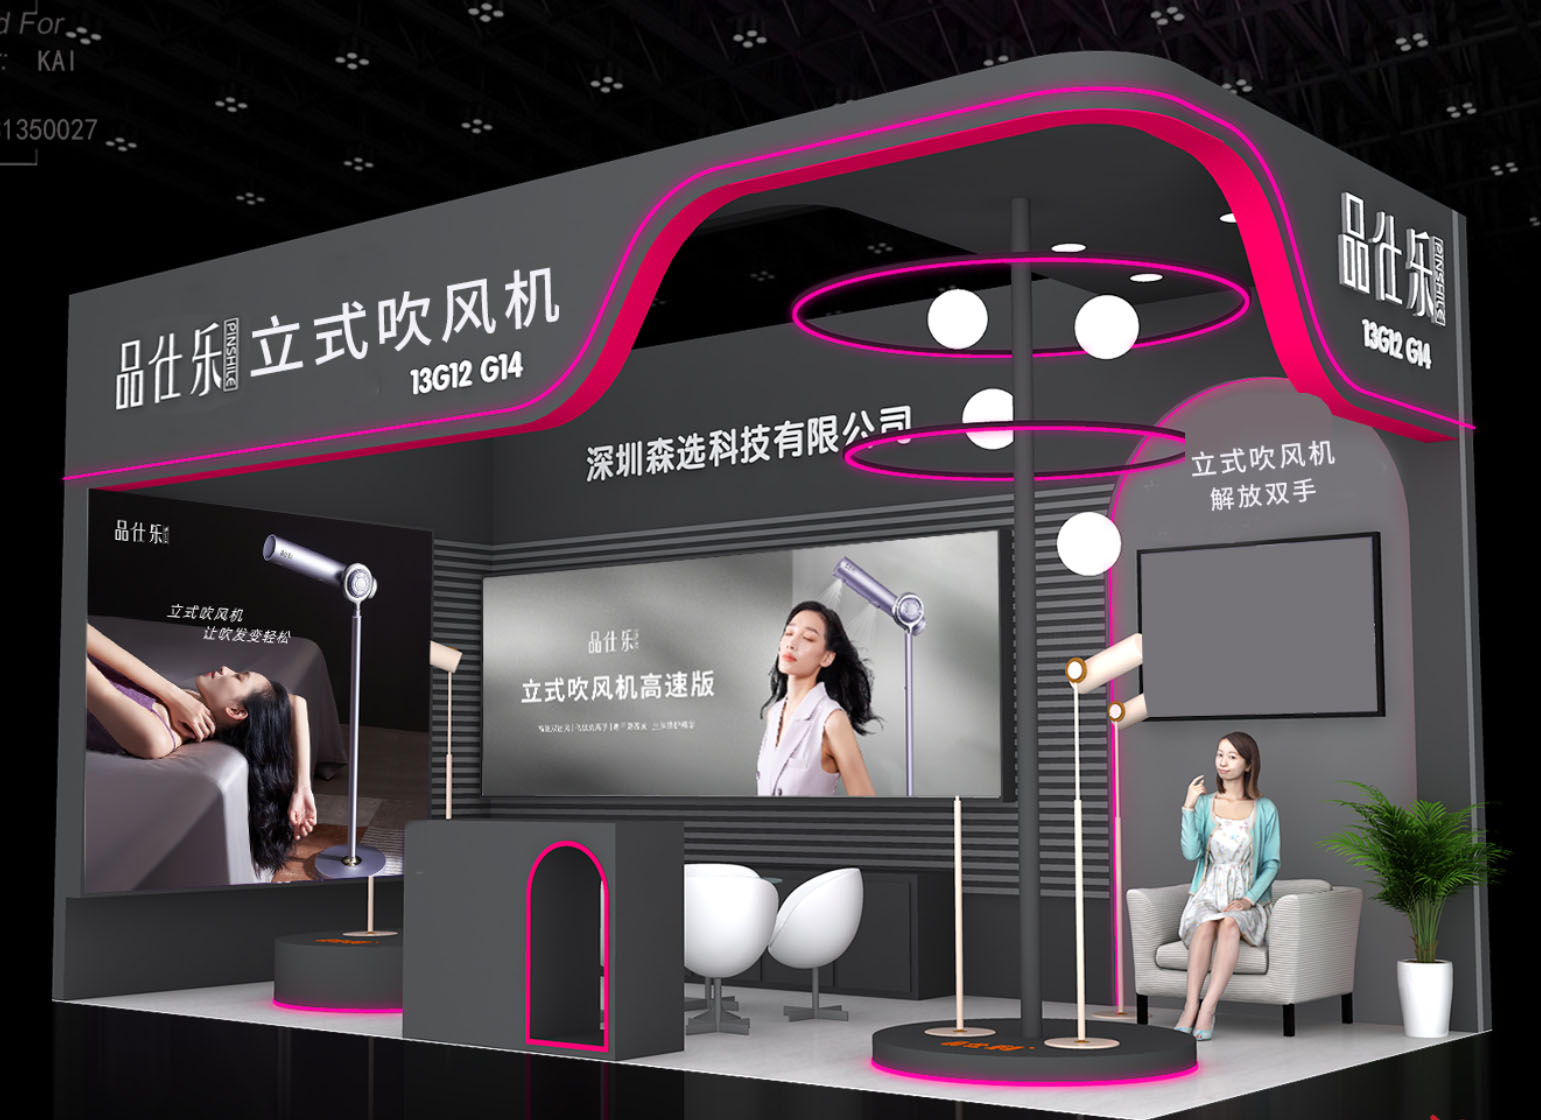 Pinshile participated in the Shenzhen Gift Fair, and its blockbuster product, the high-speed vertical hair dryer, was unveiled!